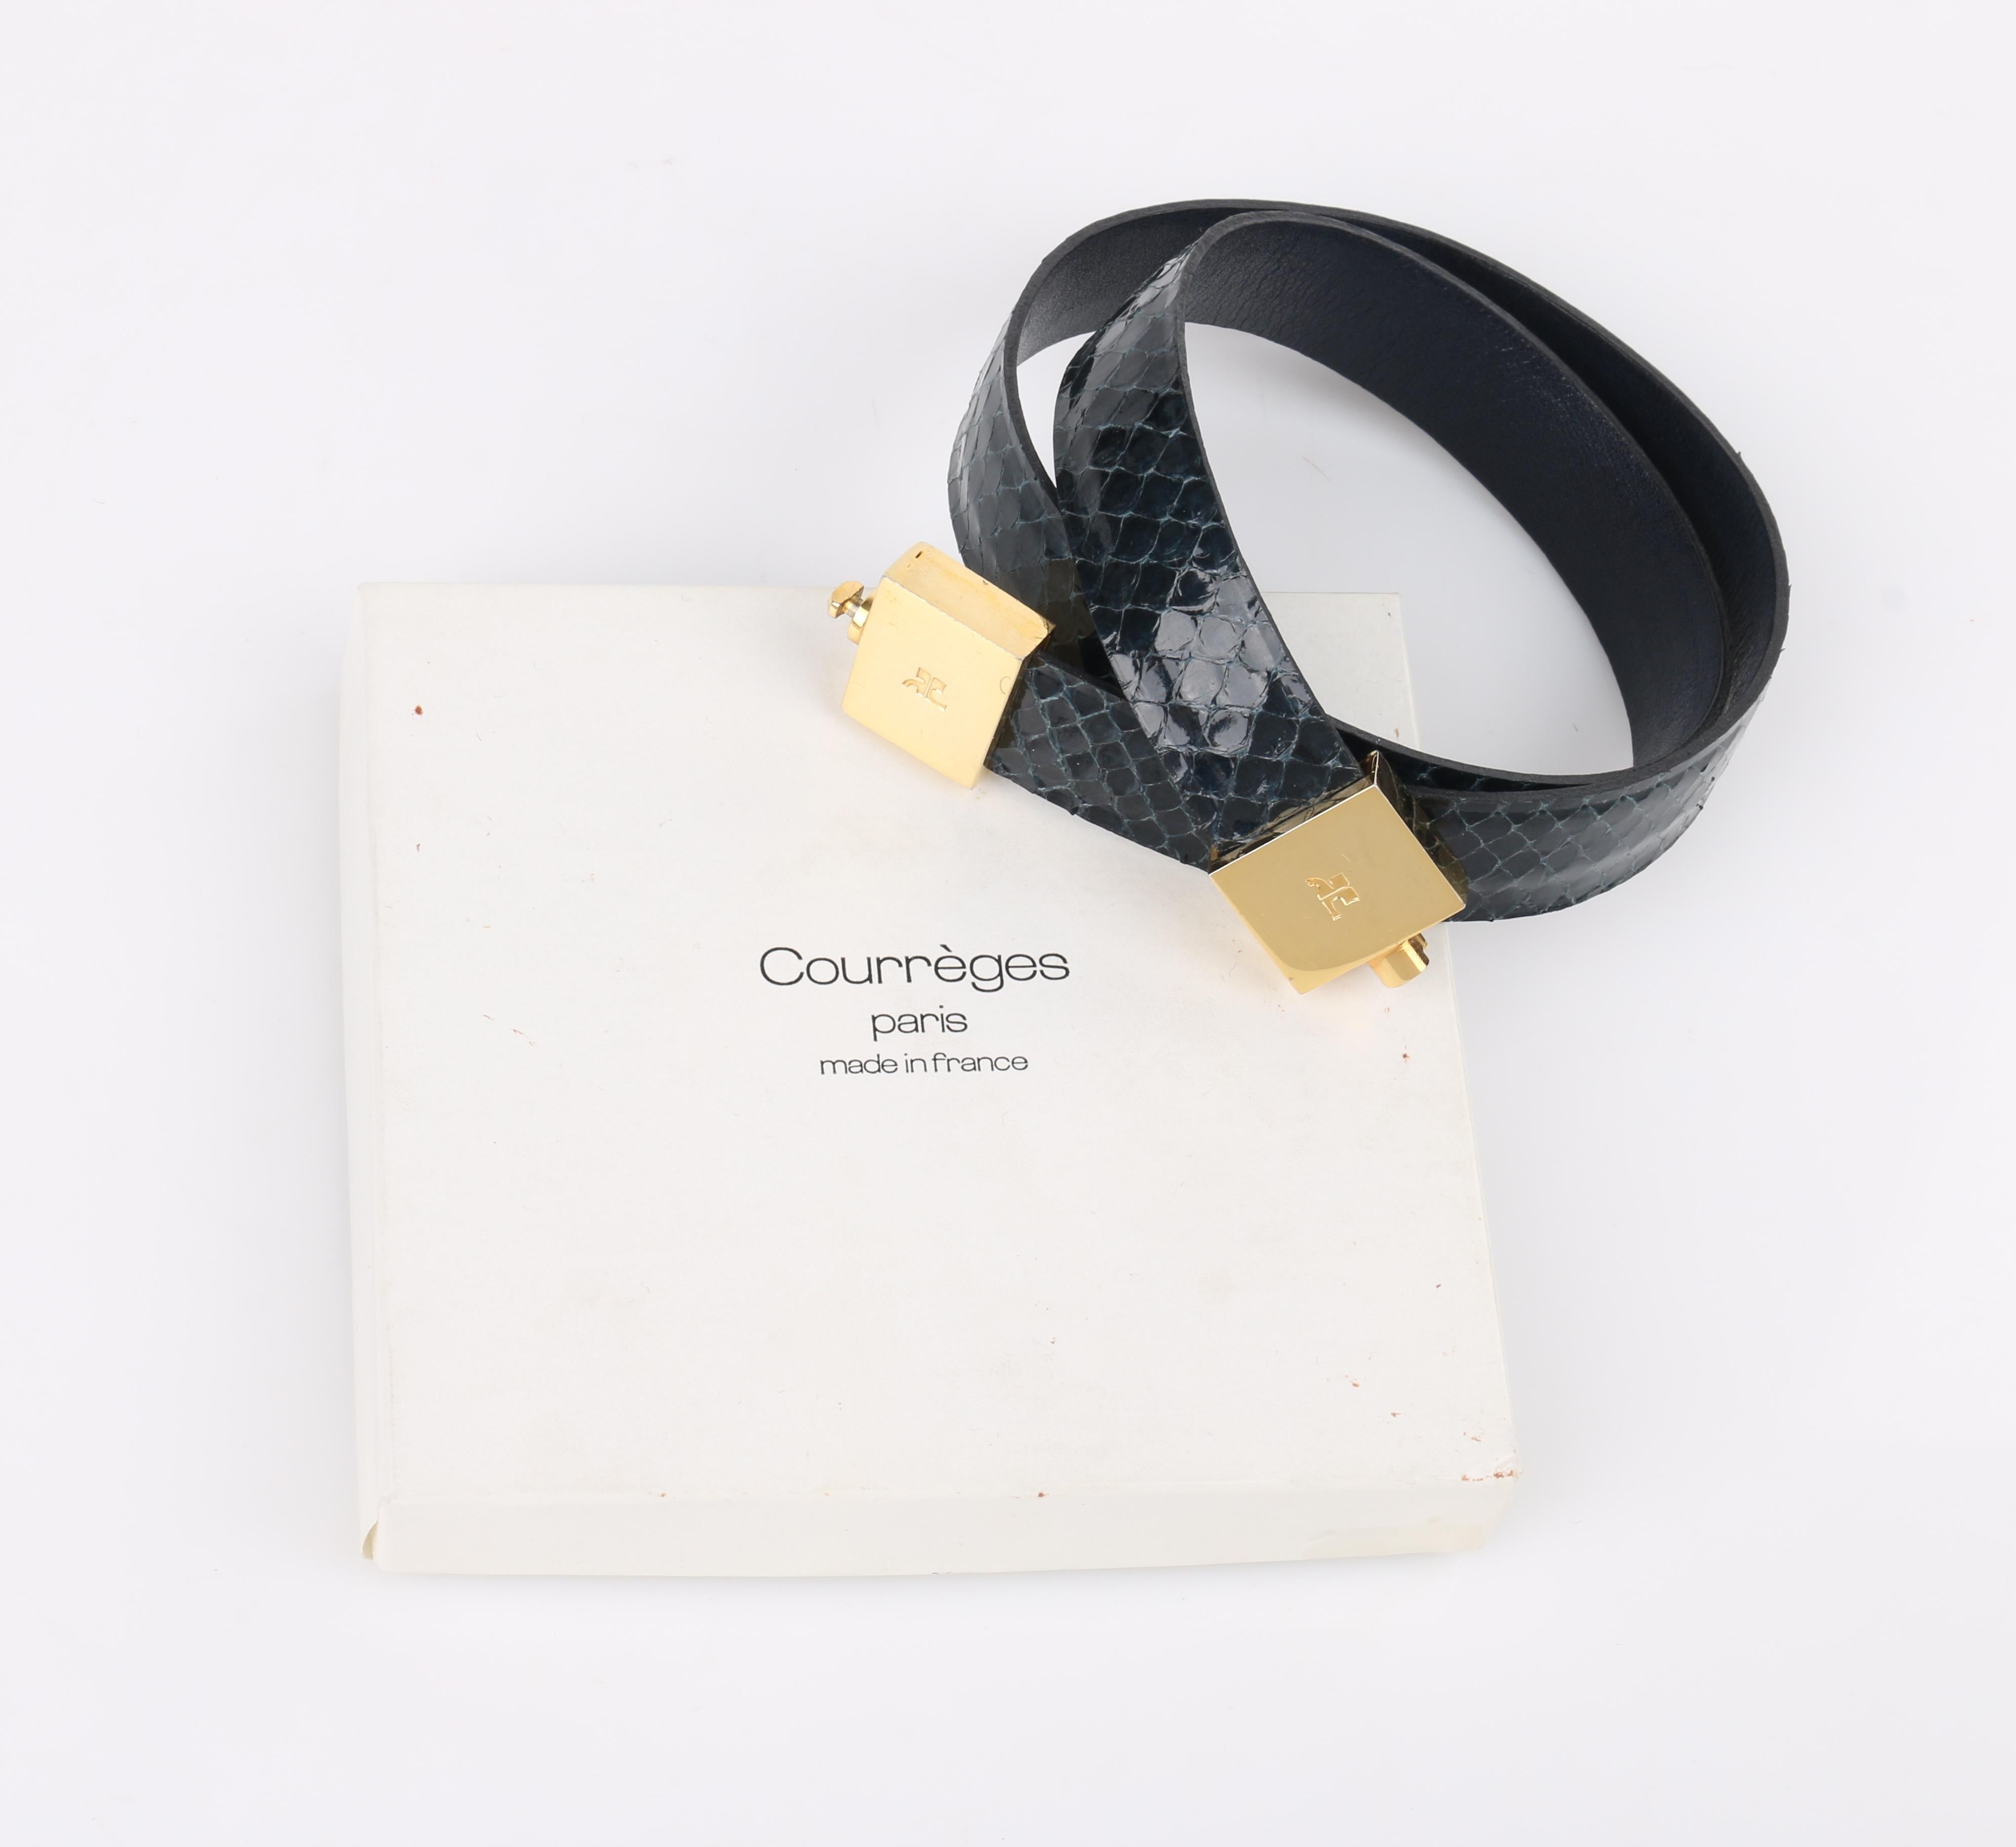 DESCRIPTION: COURREGES Black Patent Snakeskin Leather Turn Lock Closure Waist Belt
 
Circa: Late 20th century
Label(s): 
Style: Waist belt
Color(s): Shades of black; gold-toned metal hardware
Lined: 
Marked Fabric Content: 
Unmarked Fabric Content